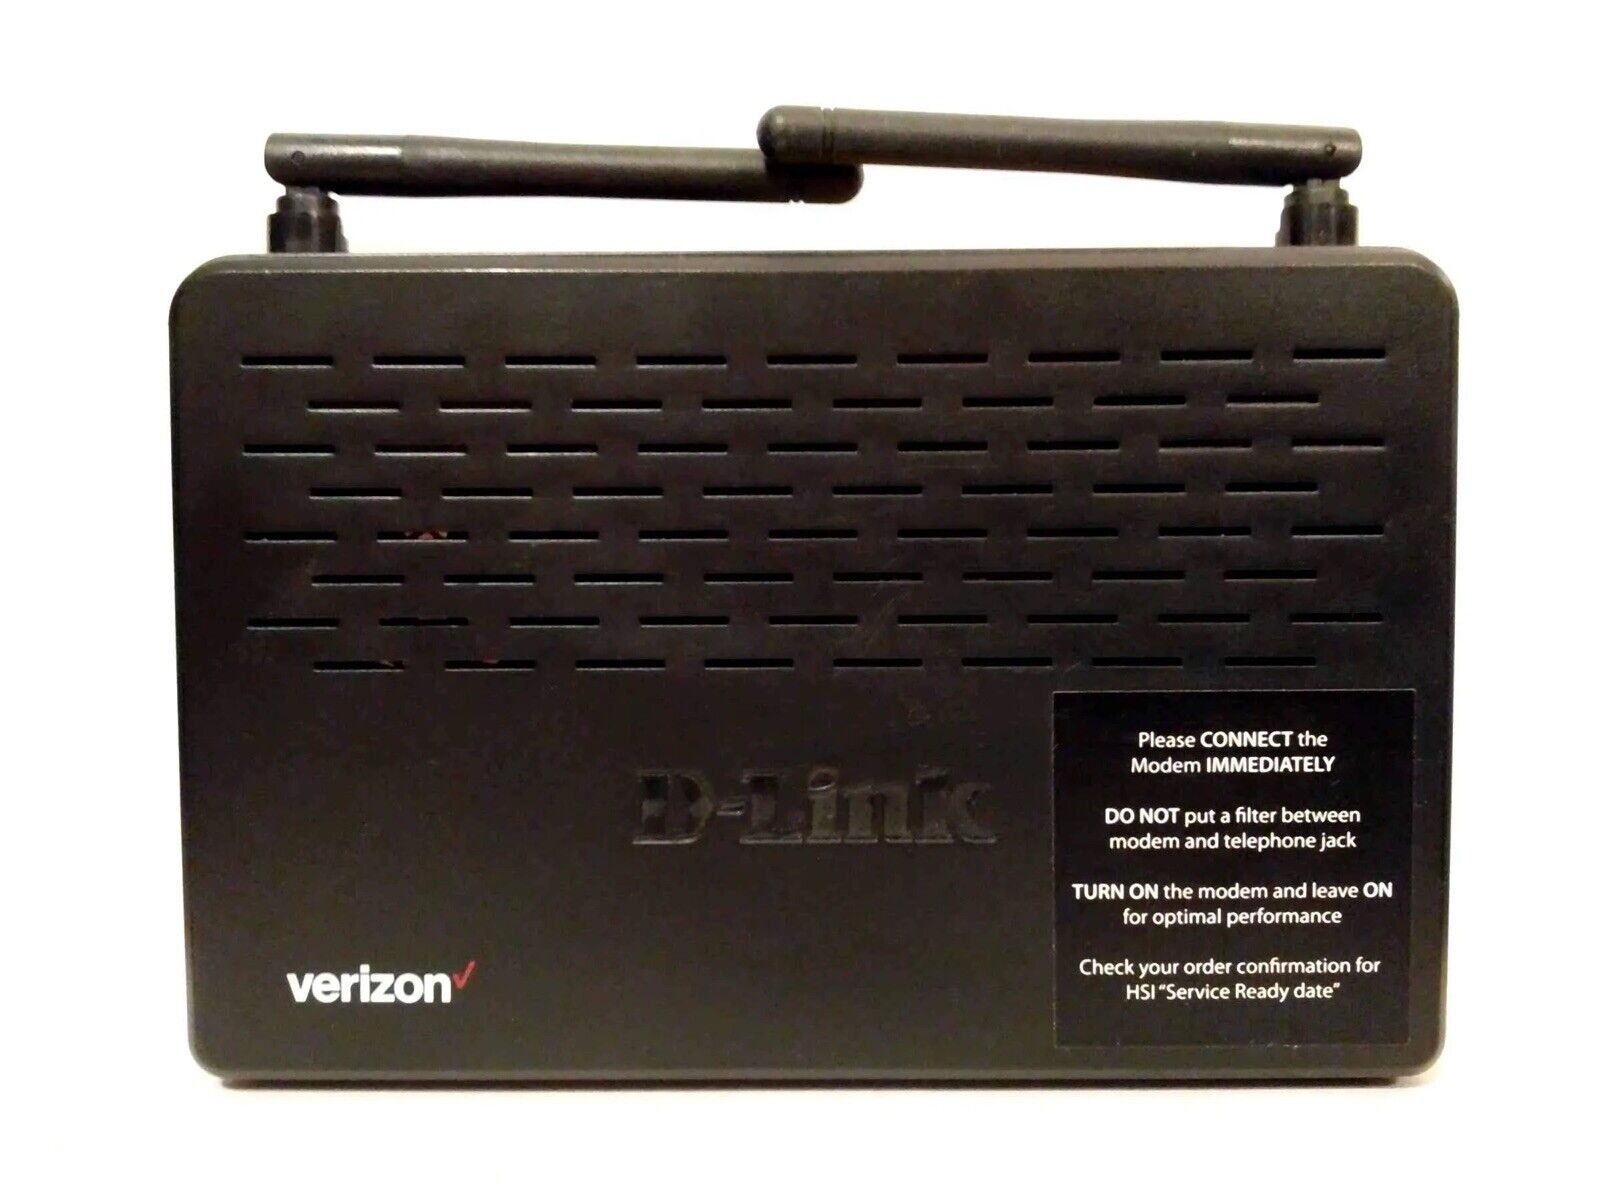 D-Link Verizon DSL-2750B Wireless Wifi Router for Home Office Business 300 Mbps